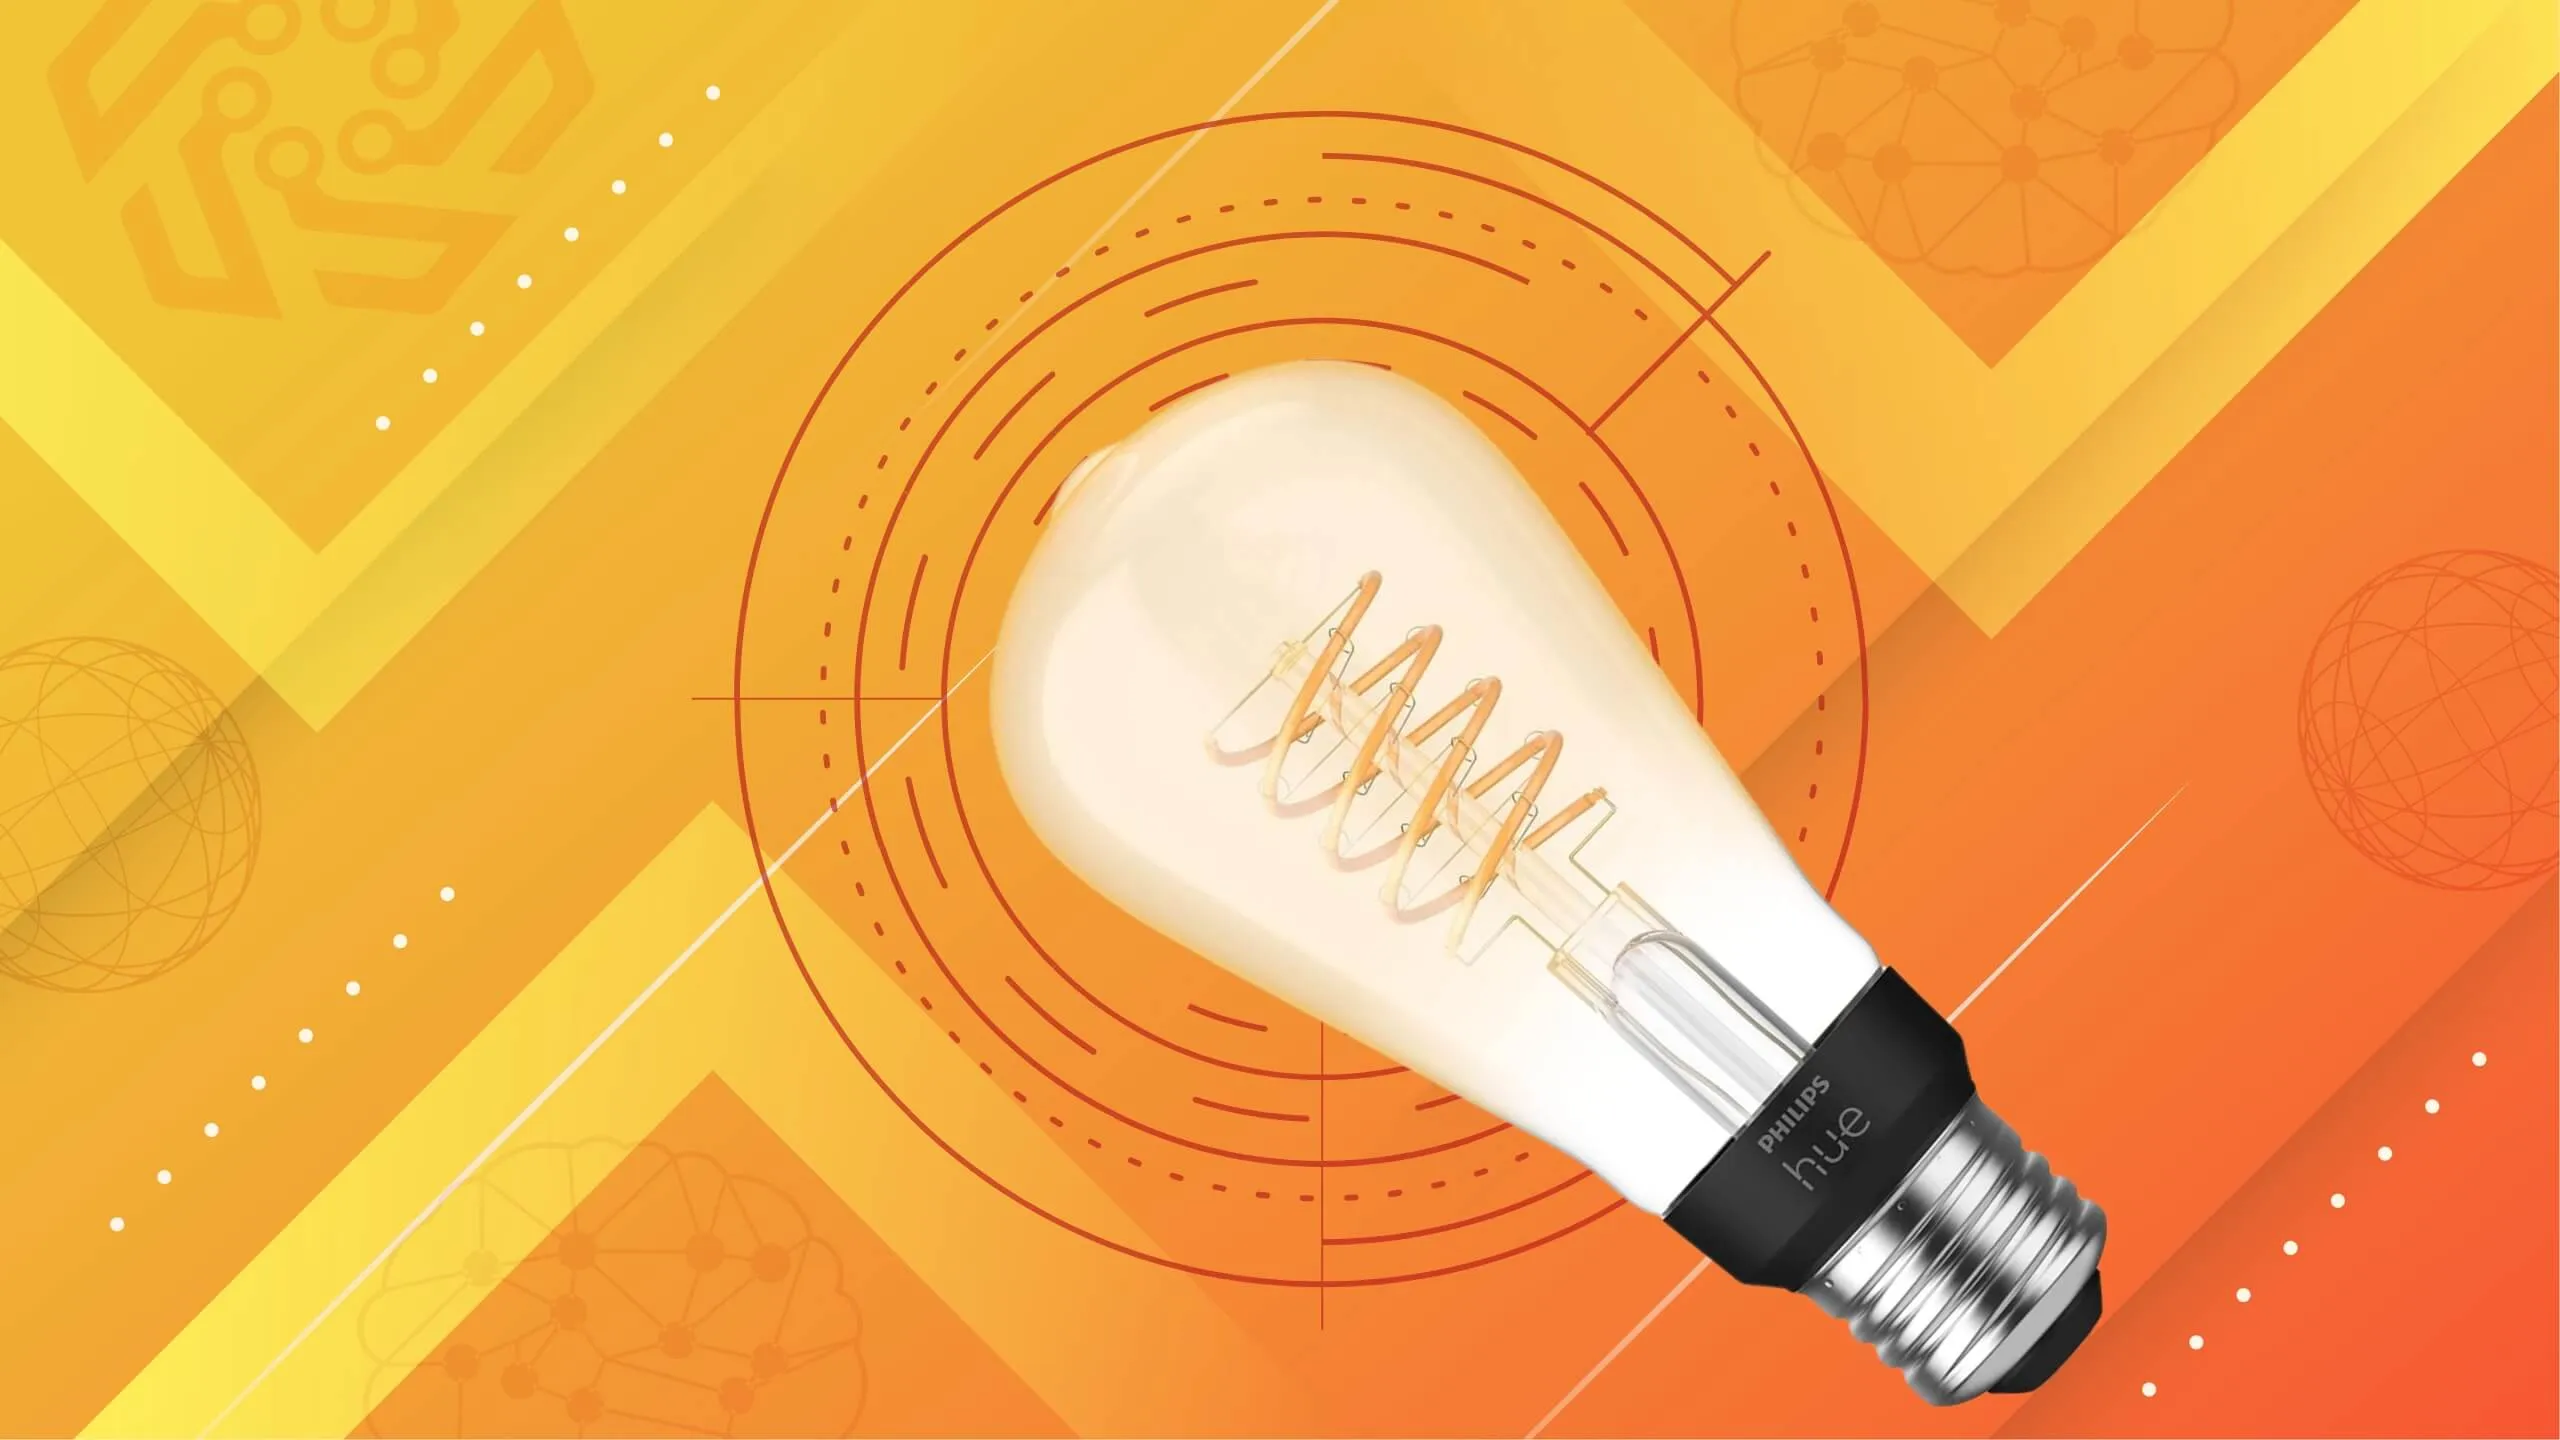 Philips Hue Filament Lamp on orange abstract background